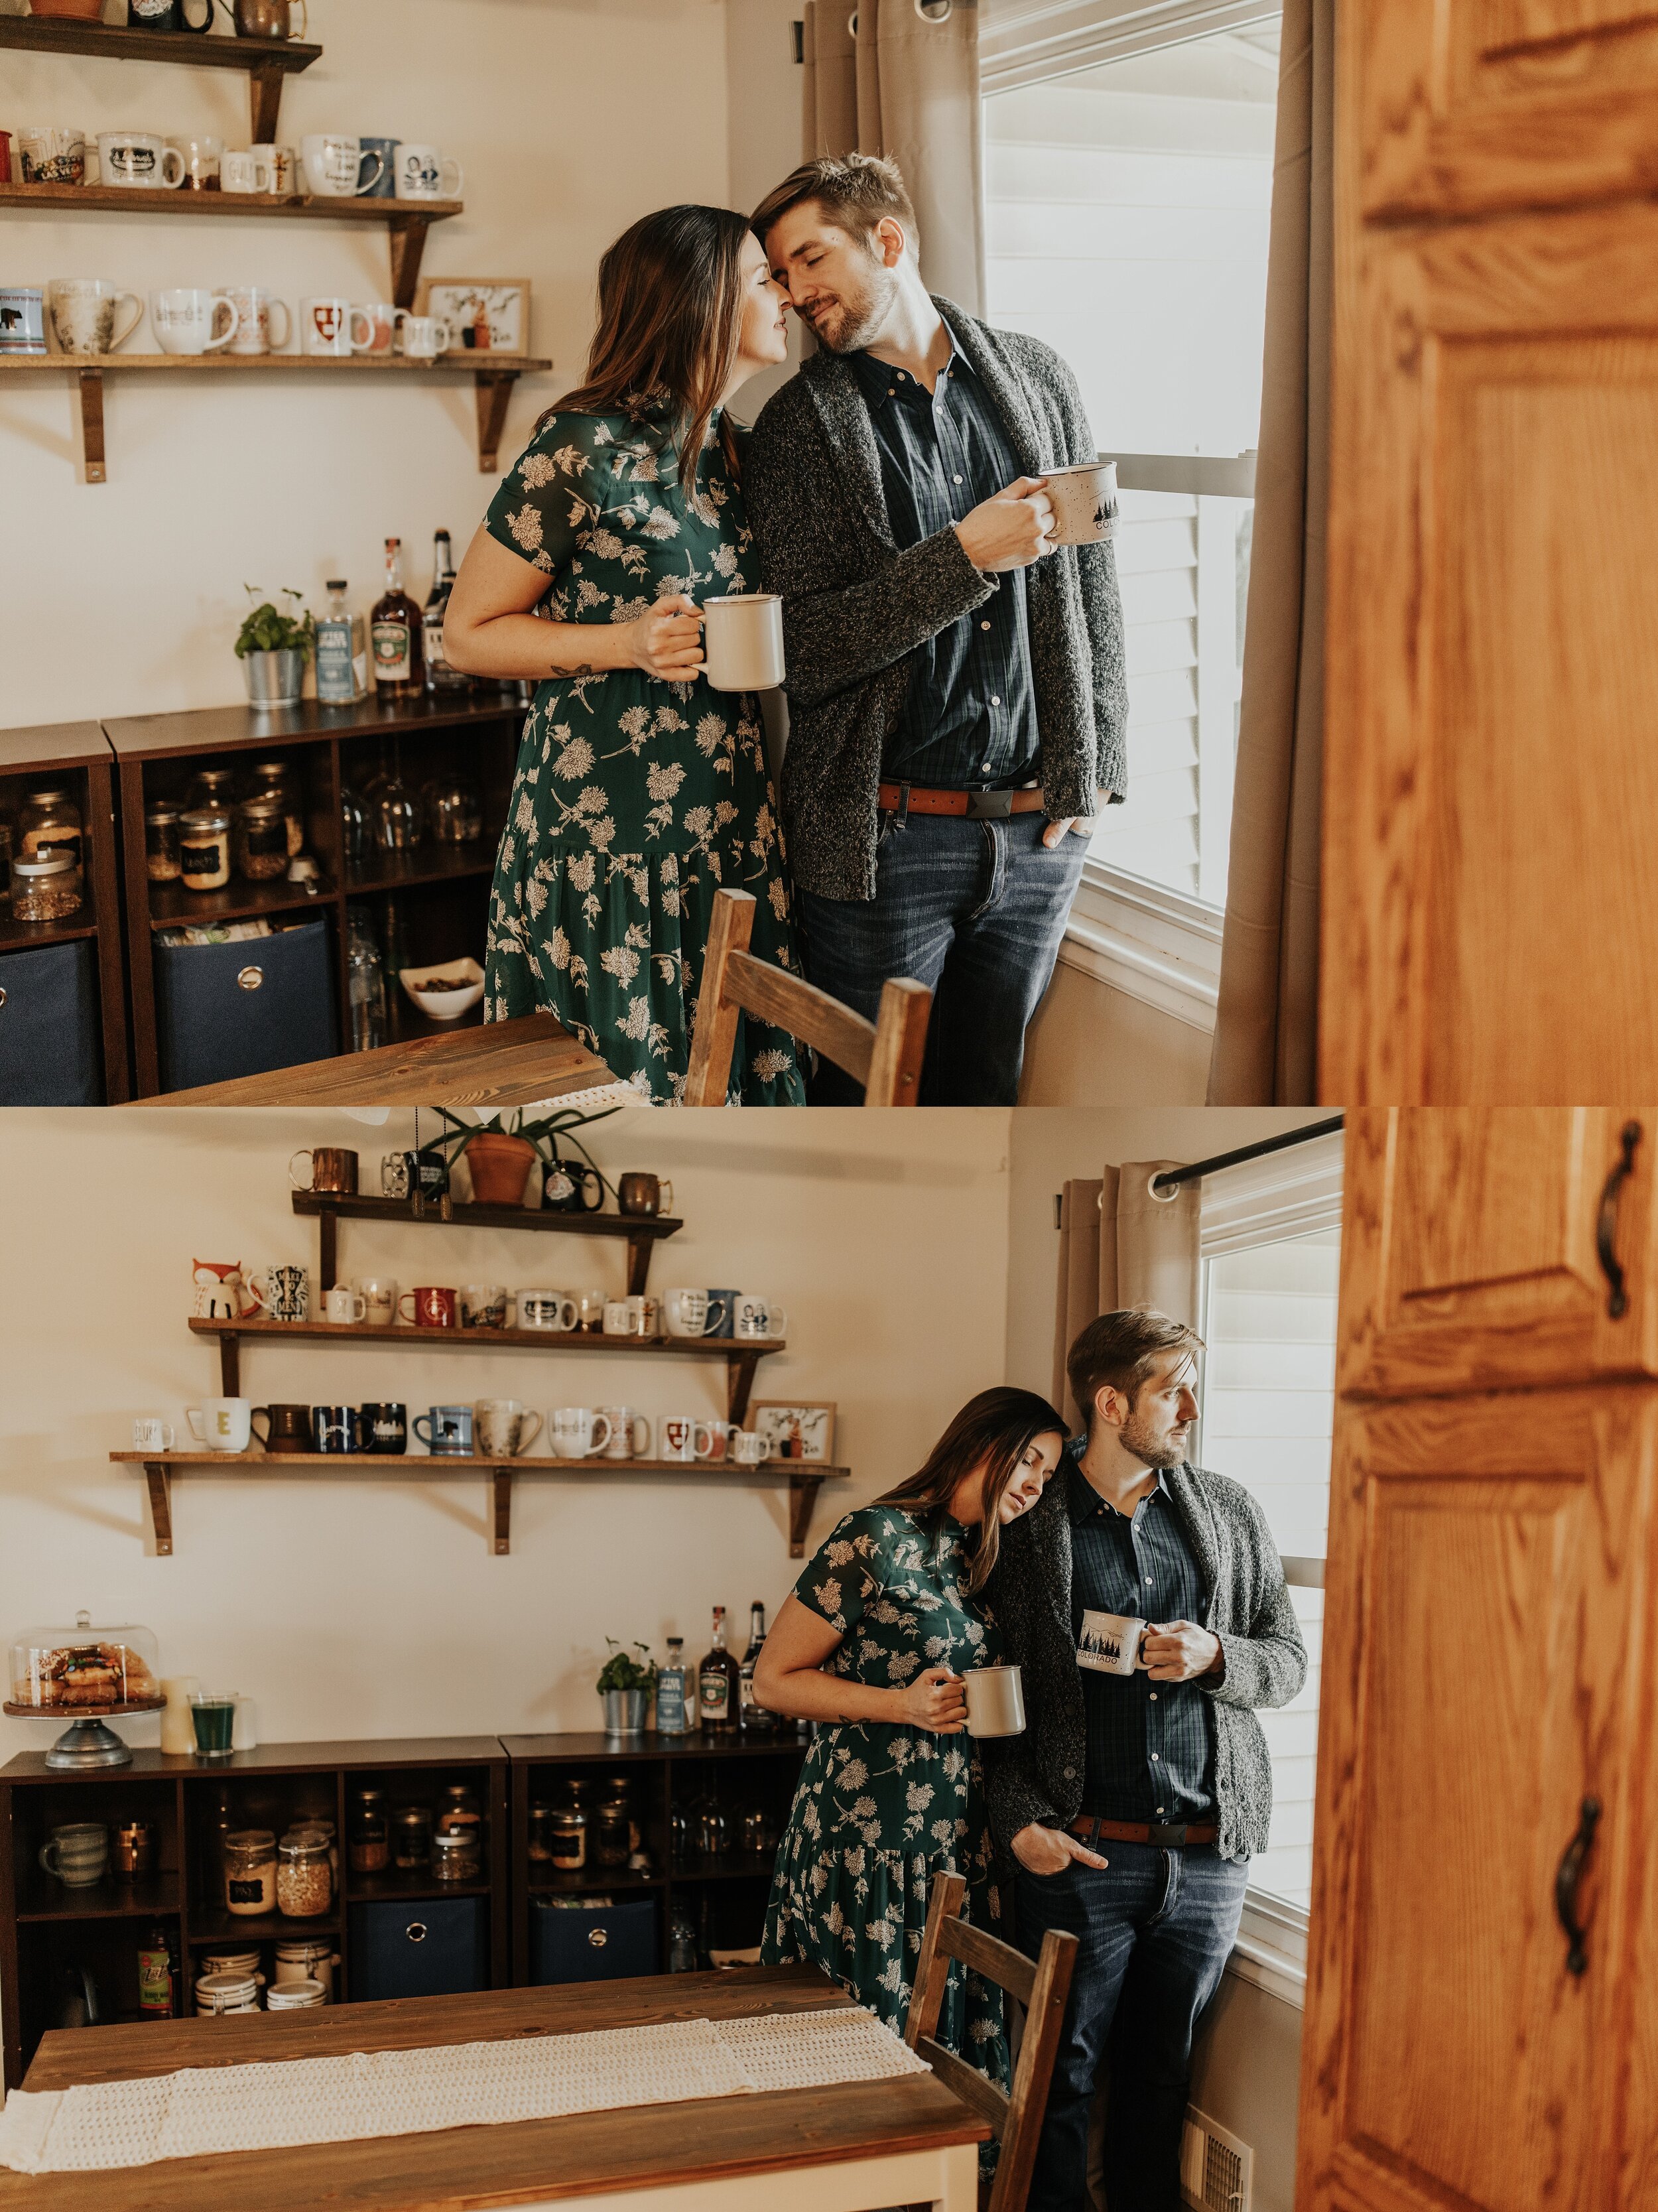 jessika-christine-photography-in+home-engagement-couples-cozy-adventurous-session (6).jpg